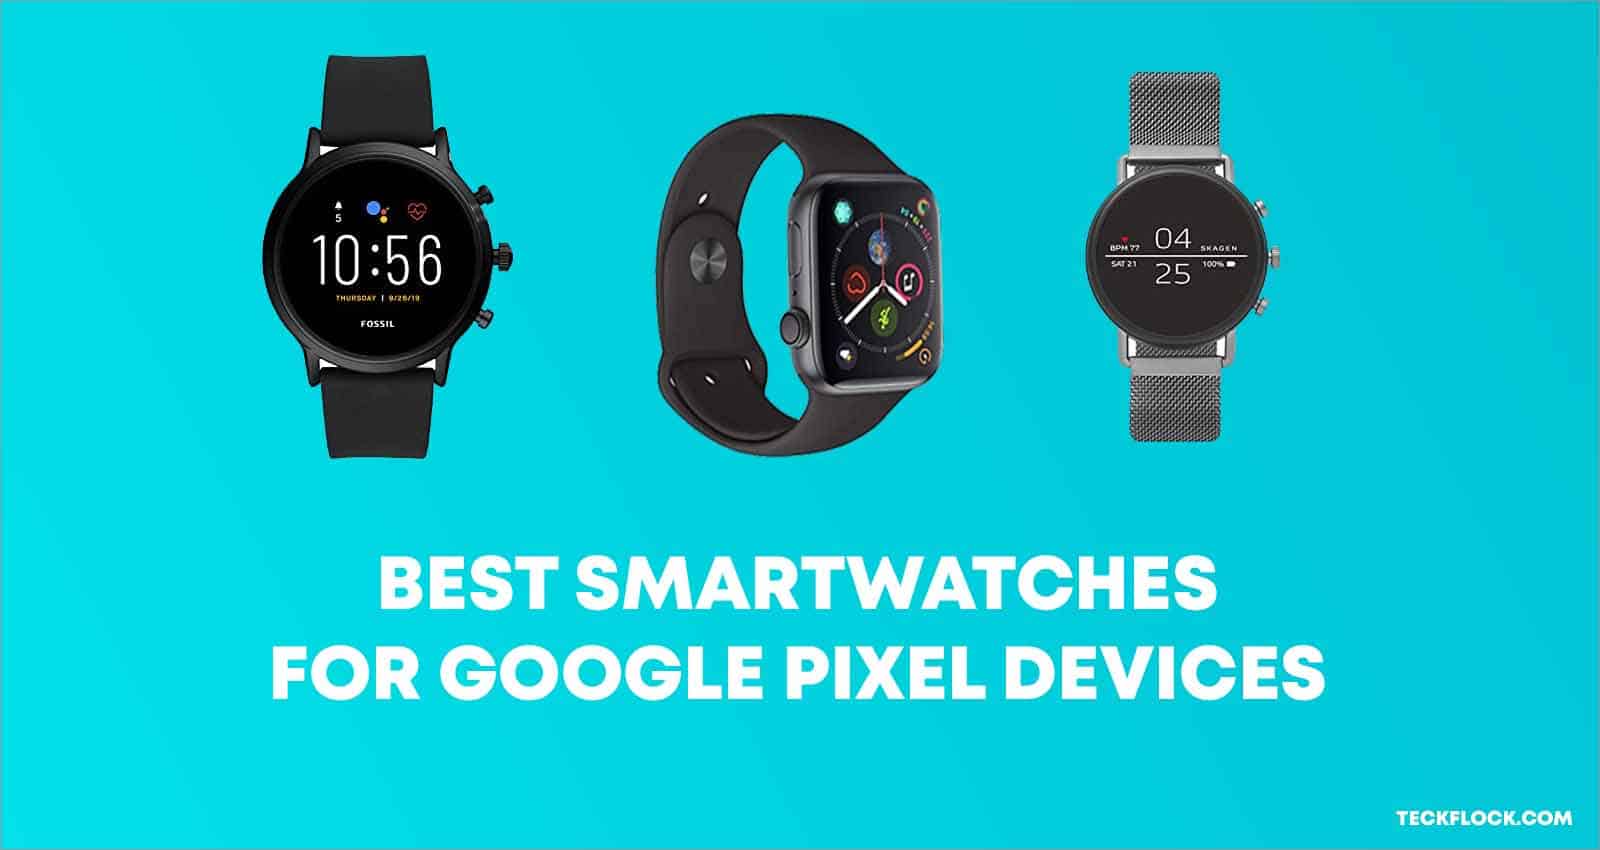 7 Best Smartwatches For Pixel 3 in 2021 [PICKS REVIEWS]